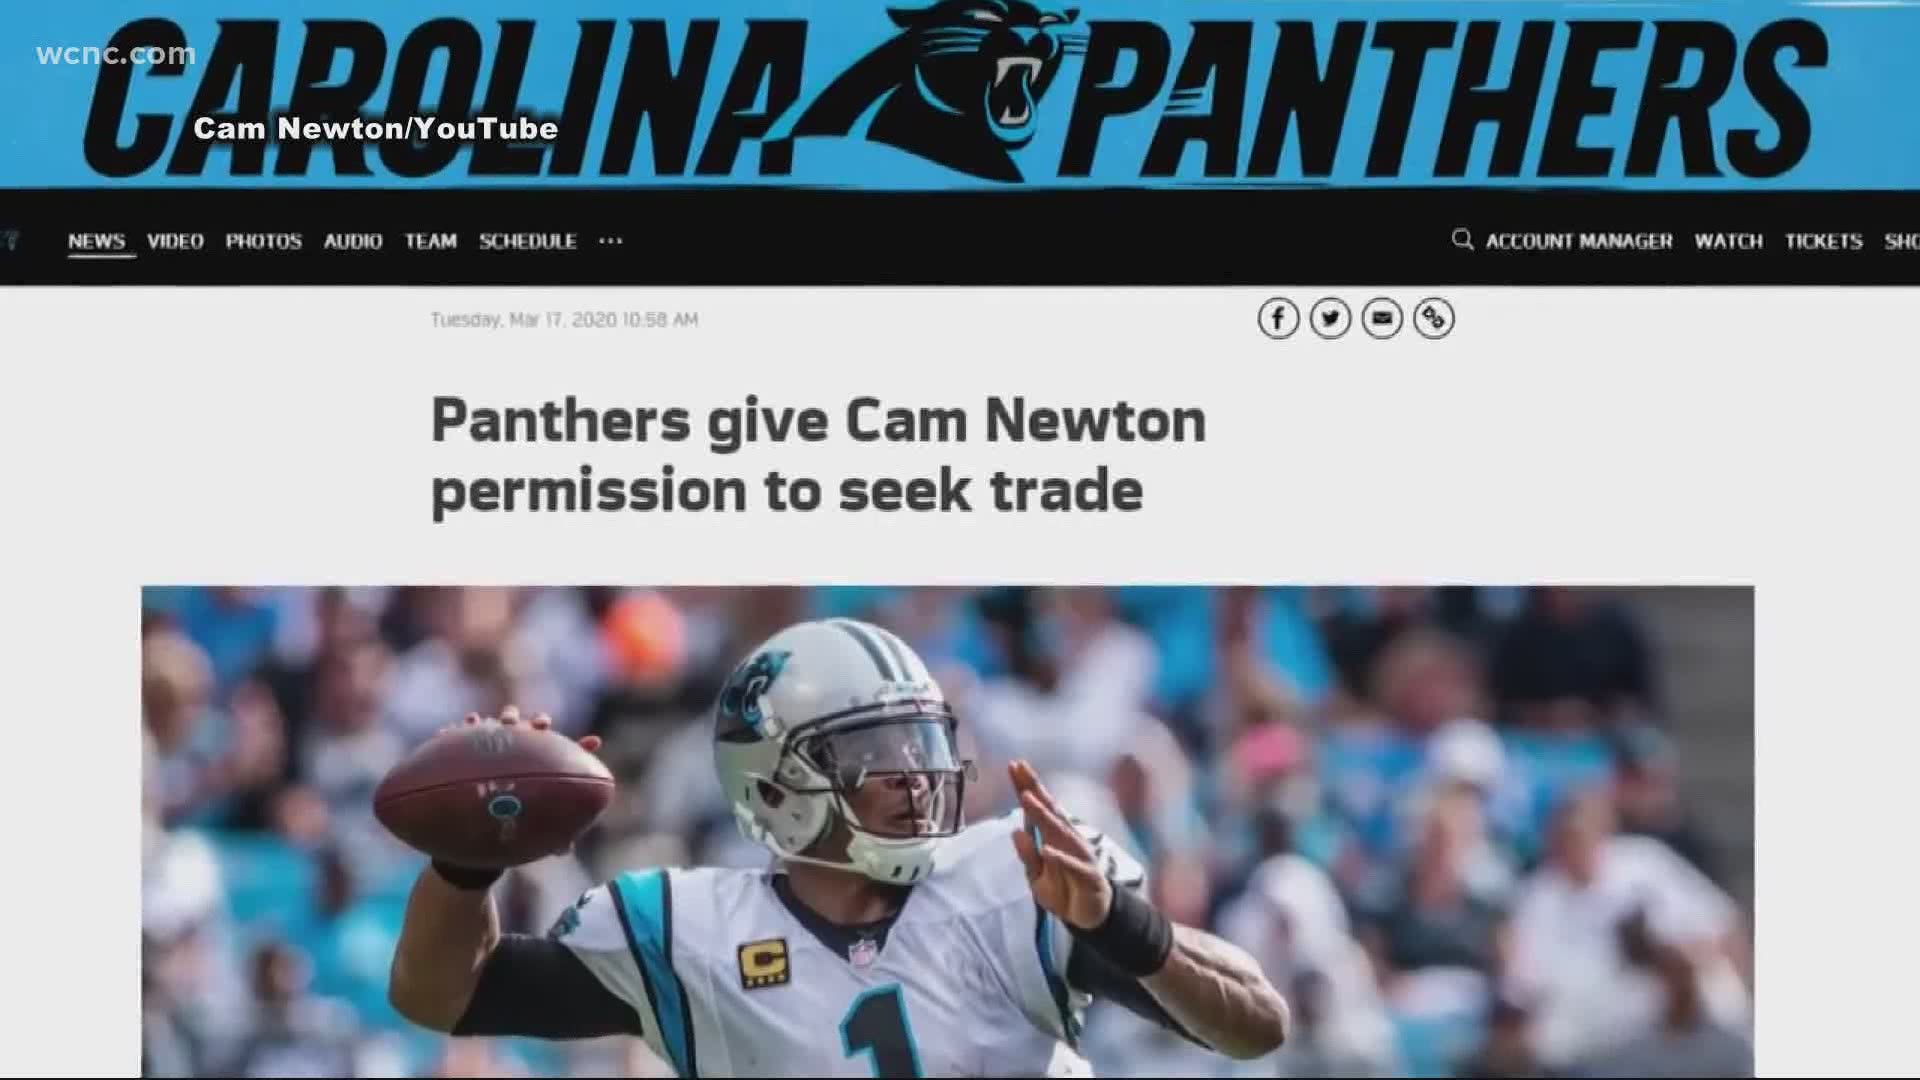 Cam Newton saying goodbye yesterday to the Carolina Panthers in a Vlog